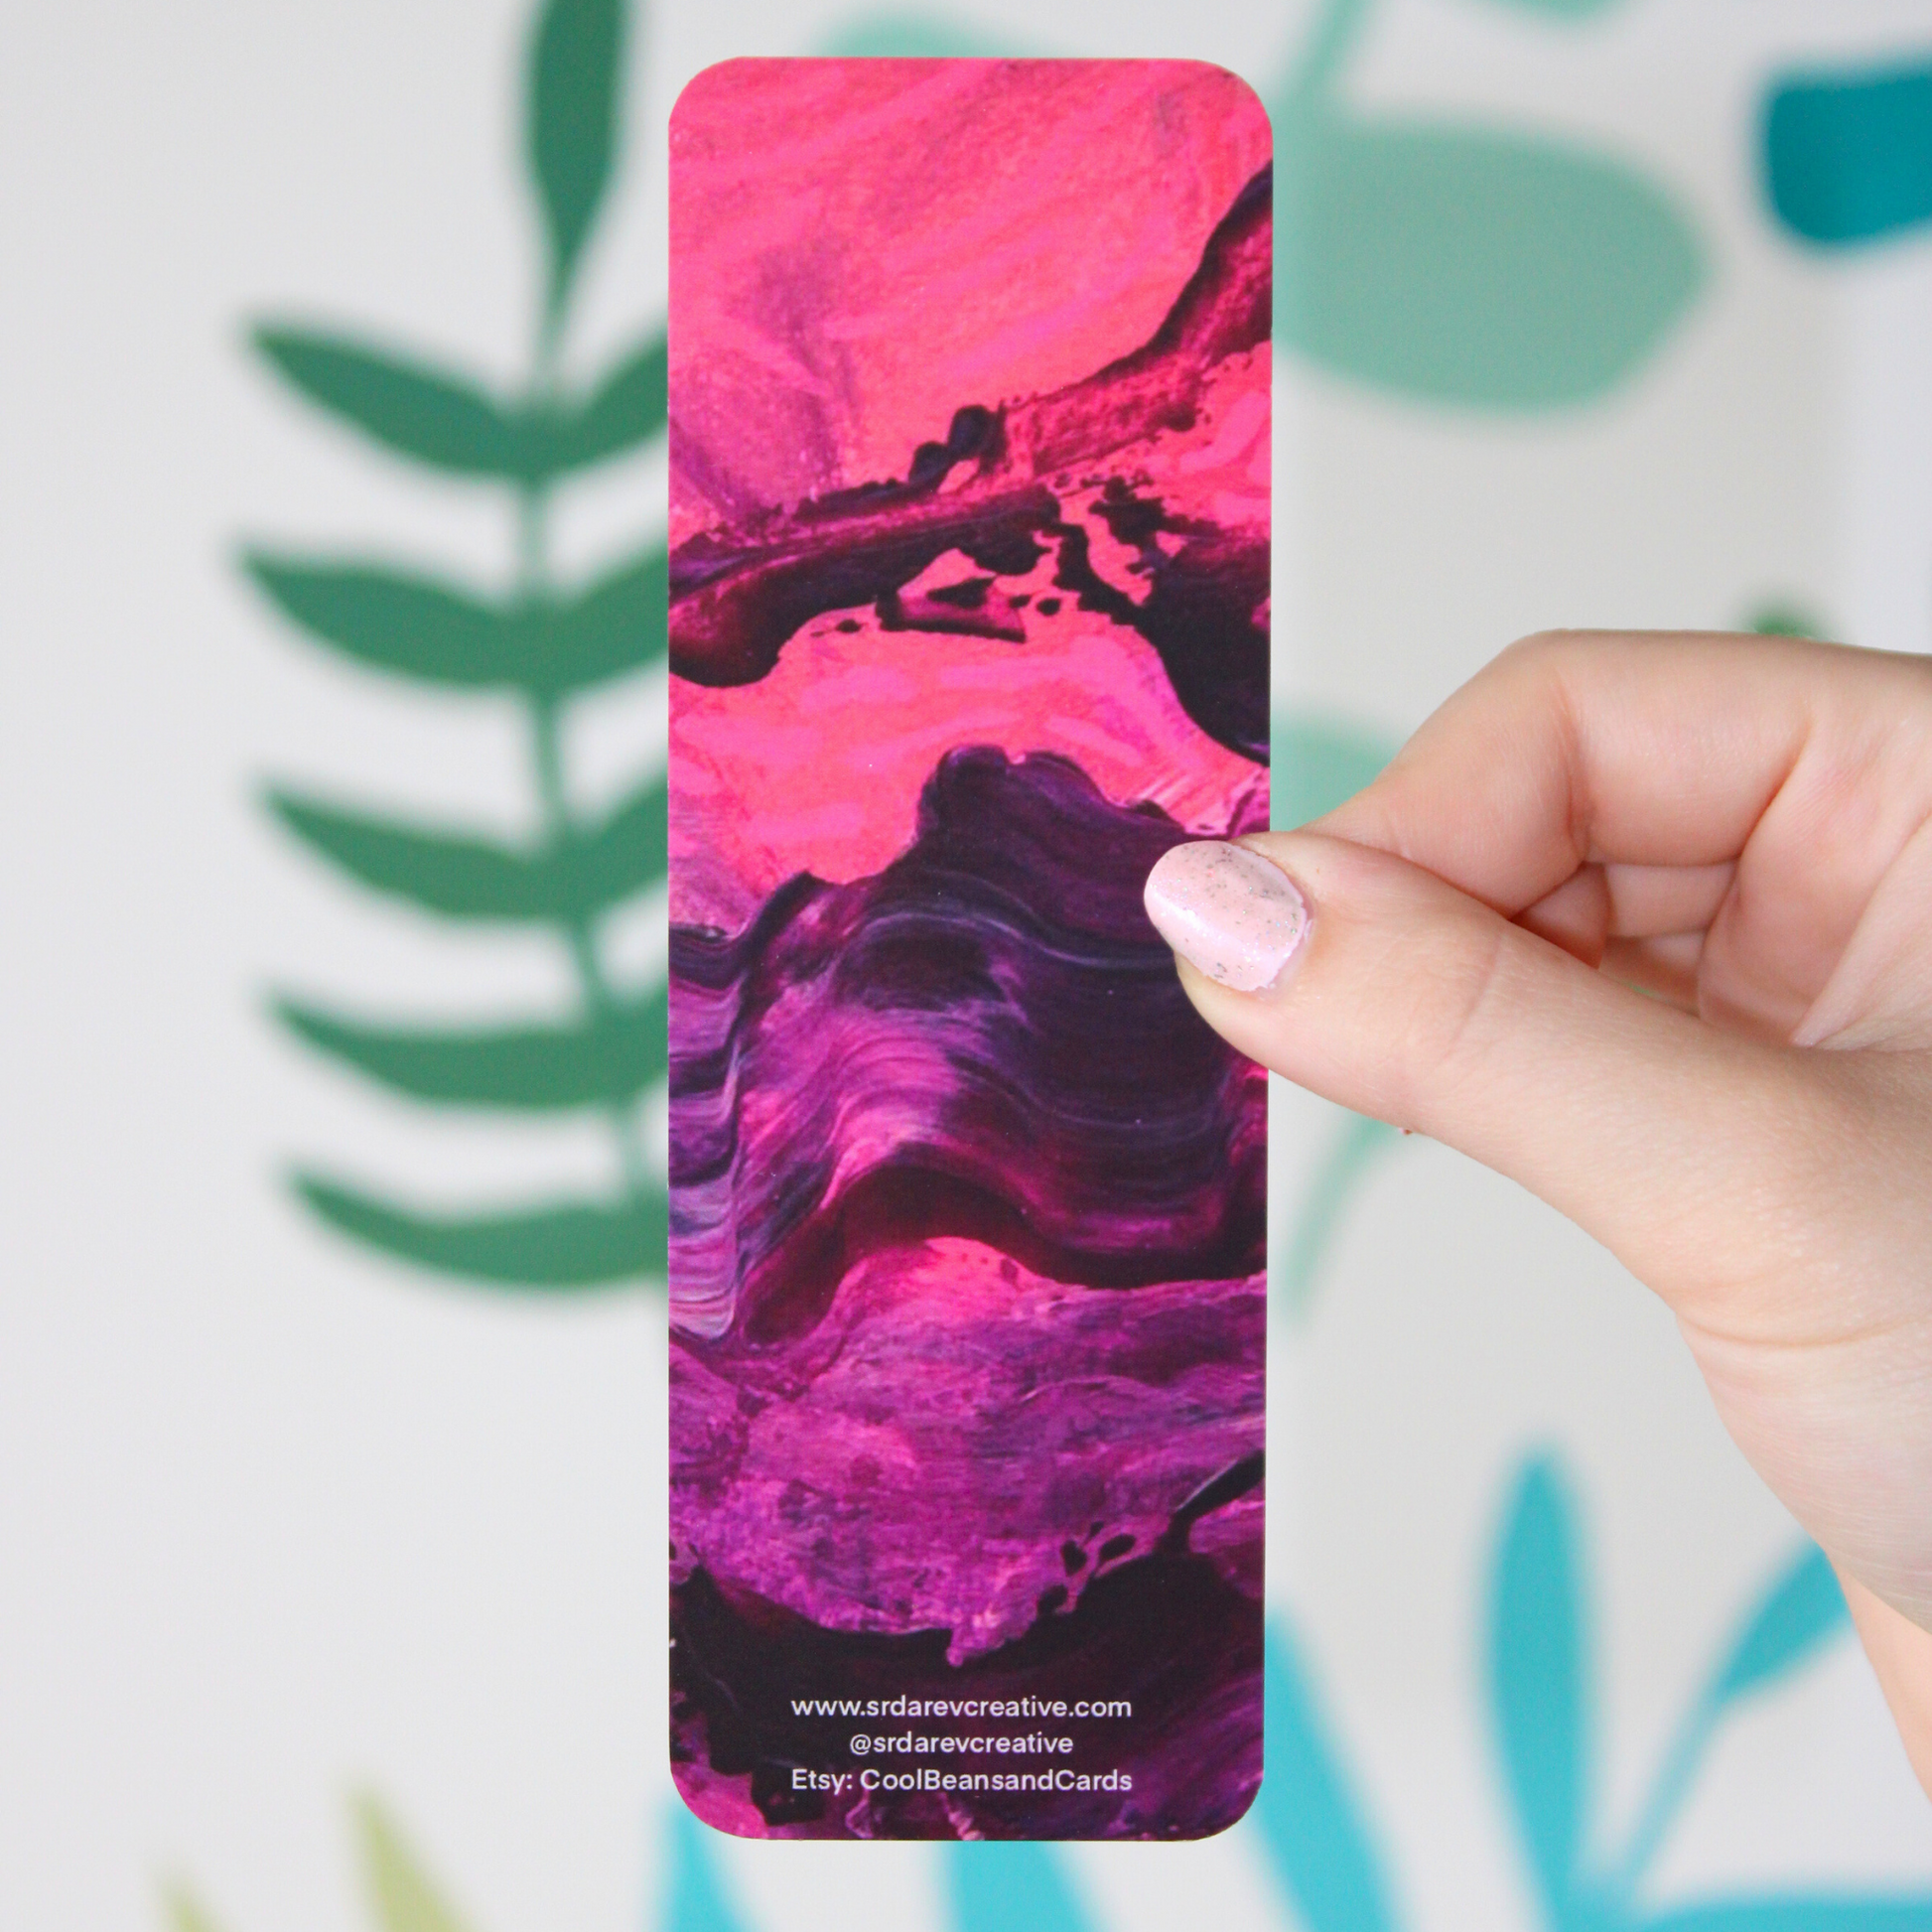 A picture of the back of a pink and purple abstract bookmark with bright pink and the top turning into purple on the bottom. There is "www.srdarevcreative.com @srdarevcreative Etsy: CoolBeansandCards" written on the bottom. The background is a blurred leaf pattern.